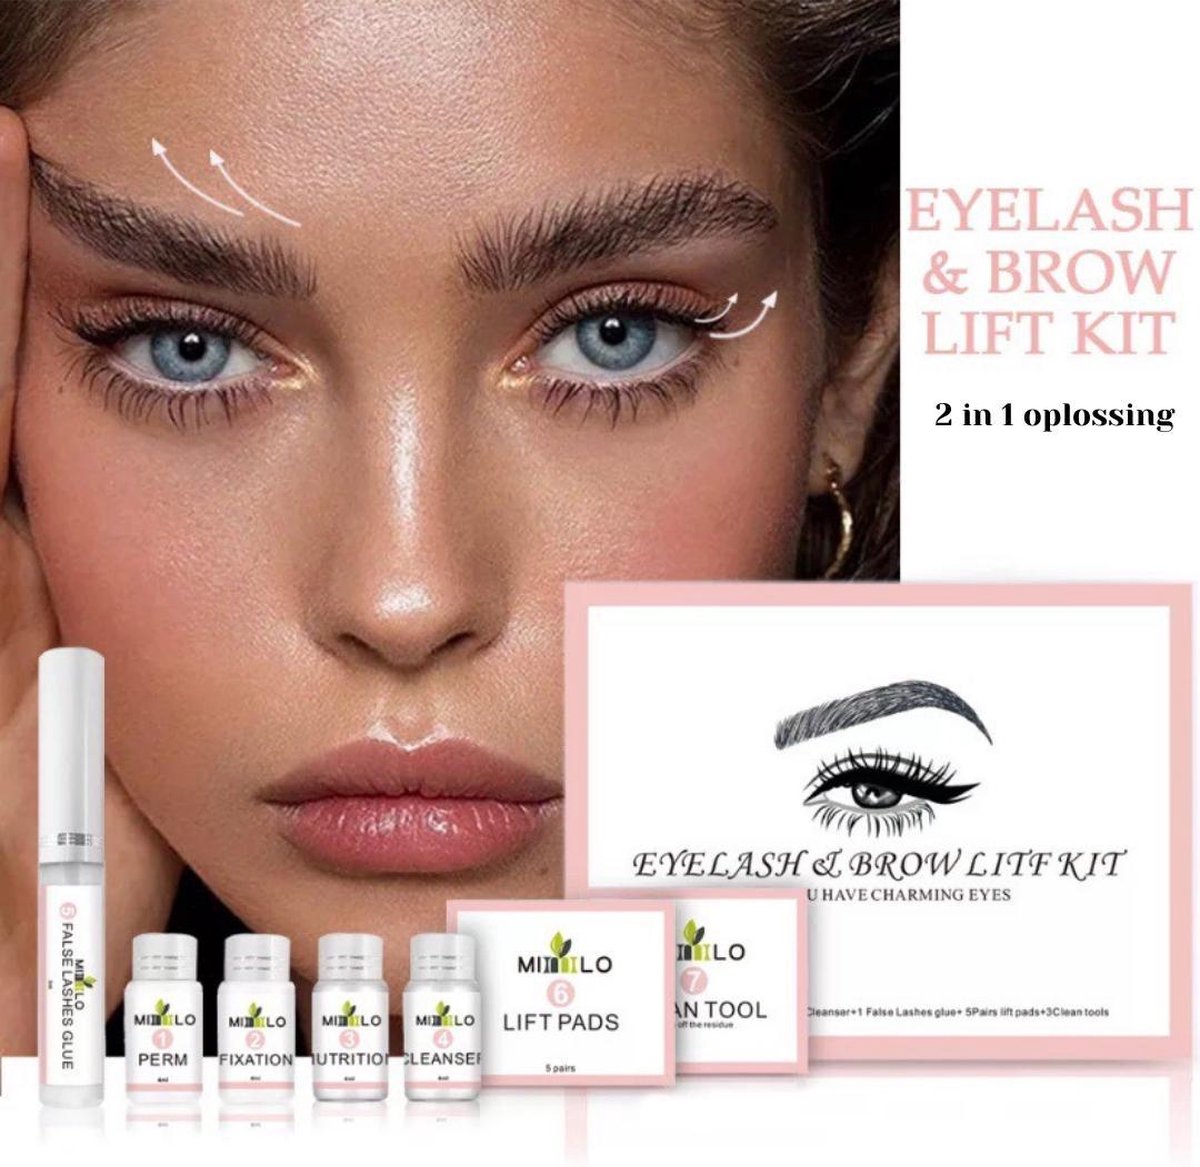 Wimper & Wenkbrauw Lifting Set - Wimperlift - Wenkbrauwlift - Lashlift - Browlift - Proffesional Wimperlifting - Lash Lift - Wimperkit - Wenkbrauwkit - Permanent Gekrulde Wimpers - Lashes and Brows - Lash & Brow Kit